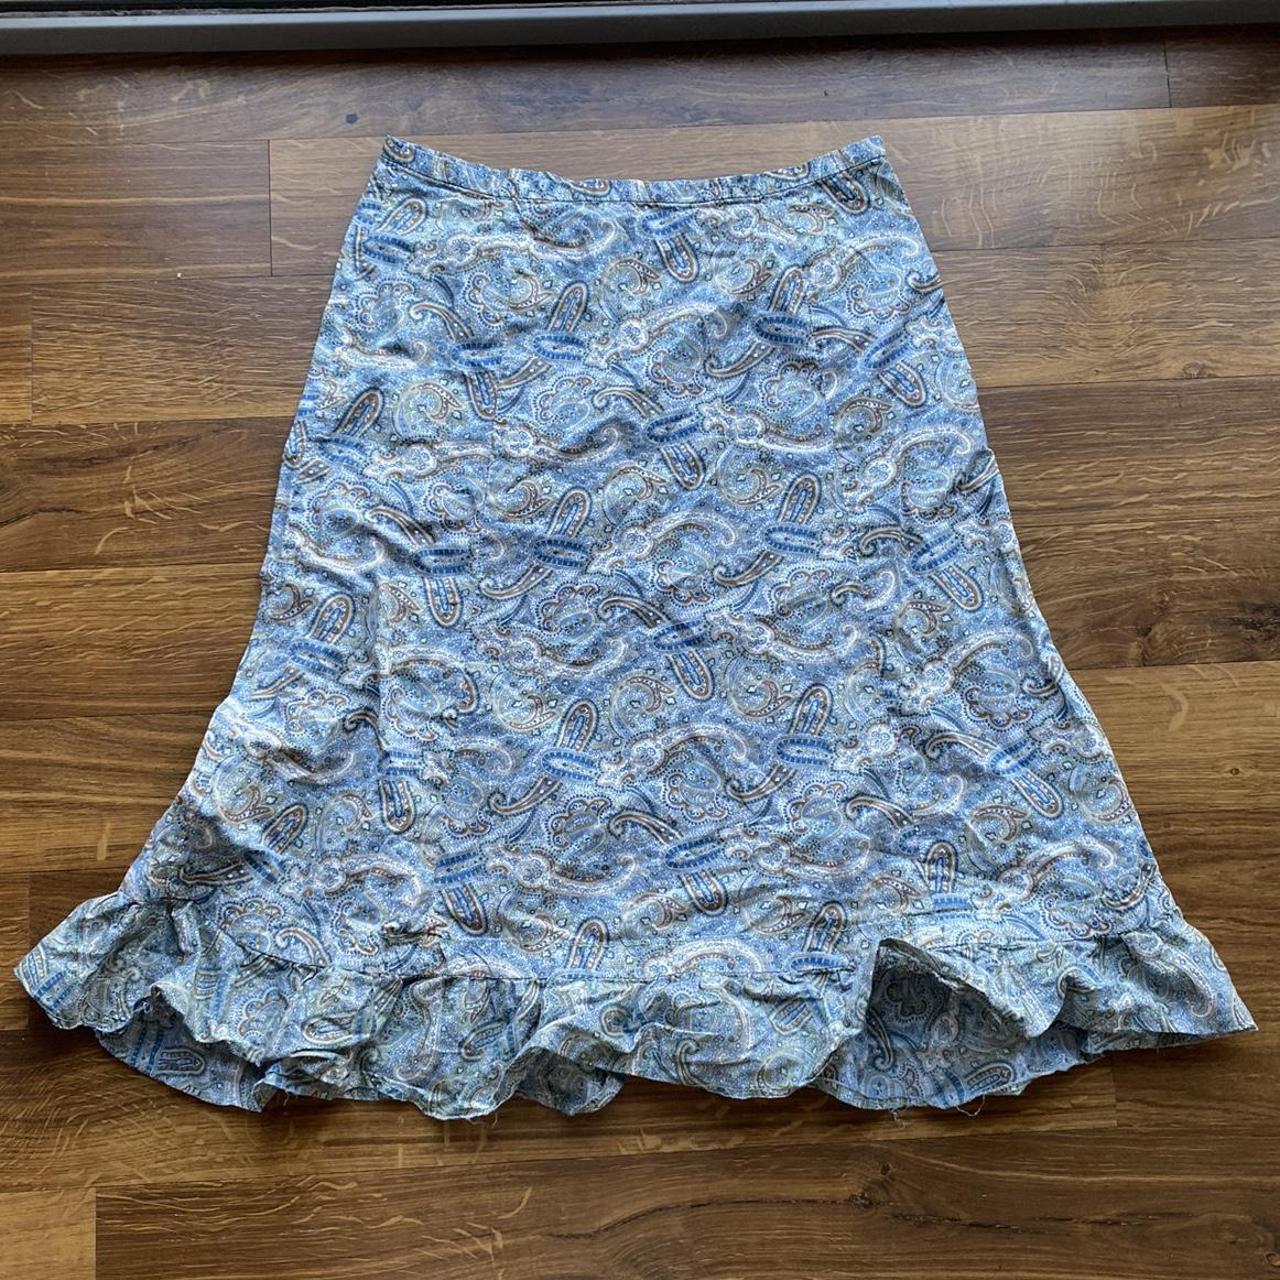 Blue Paisley Print 90s Long Skirt Adorable and in... - Depop